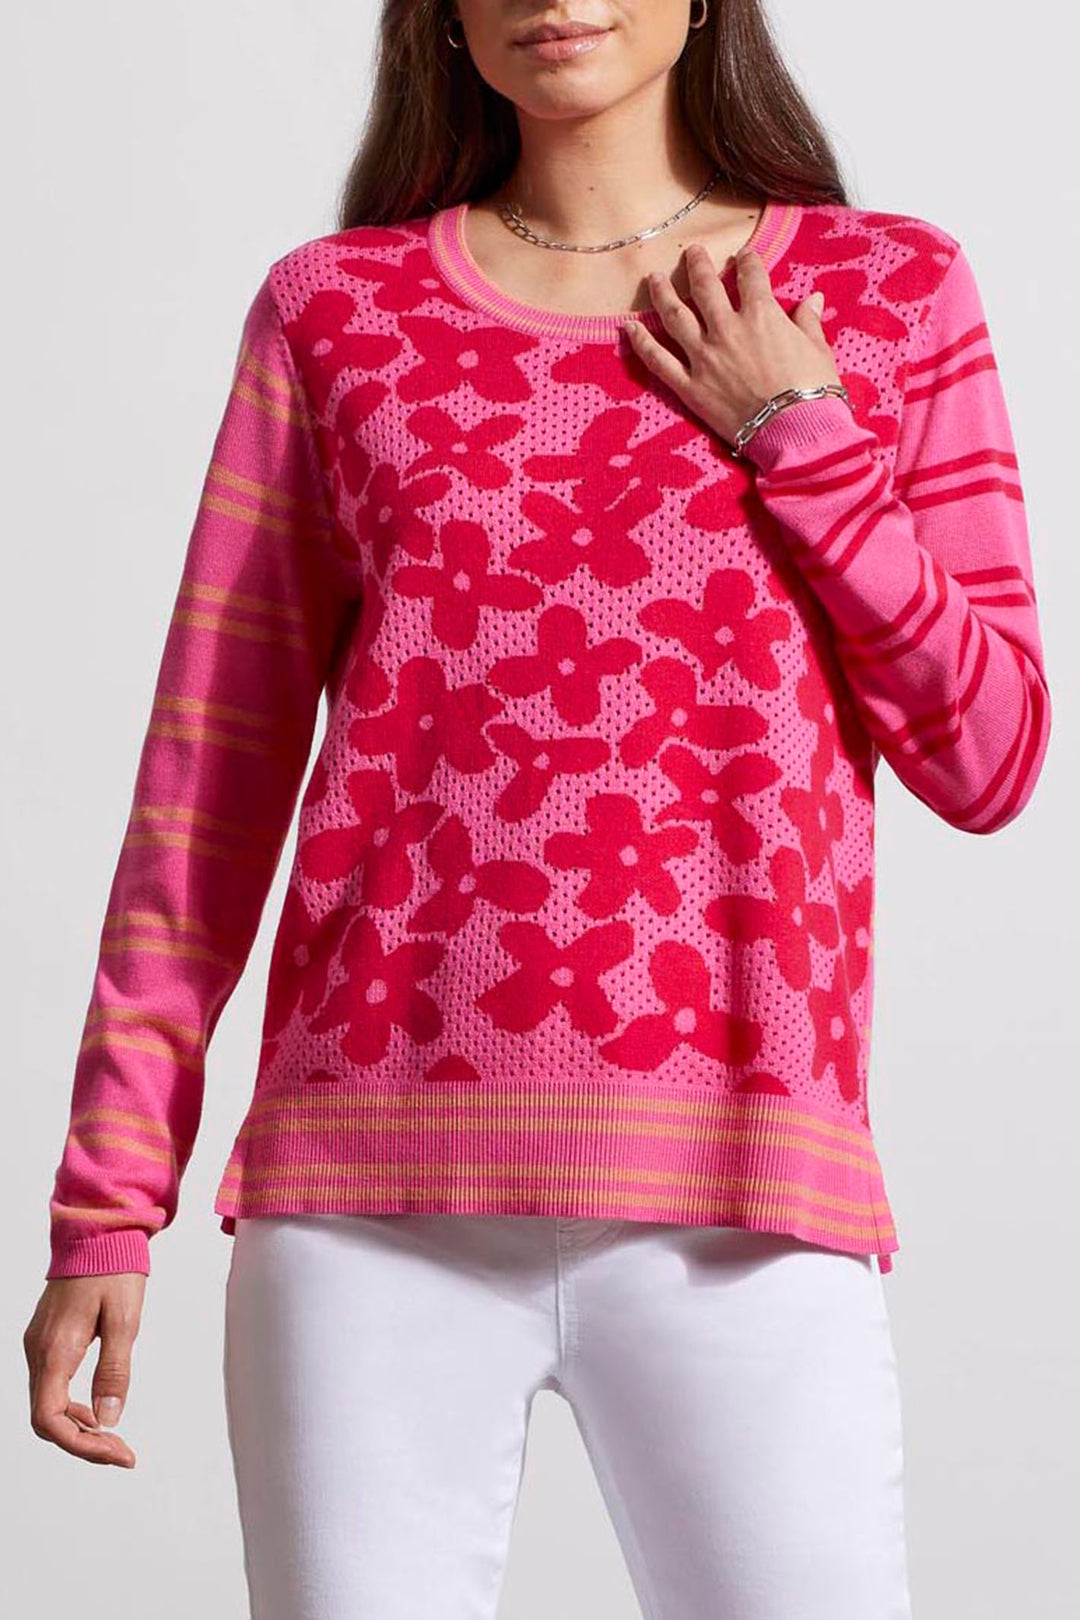 Tribal 54820 Hot Pink Floral Stripe Mesh Knit Jumper - Experience Boutique